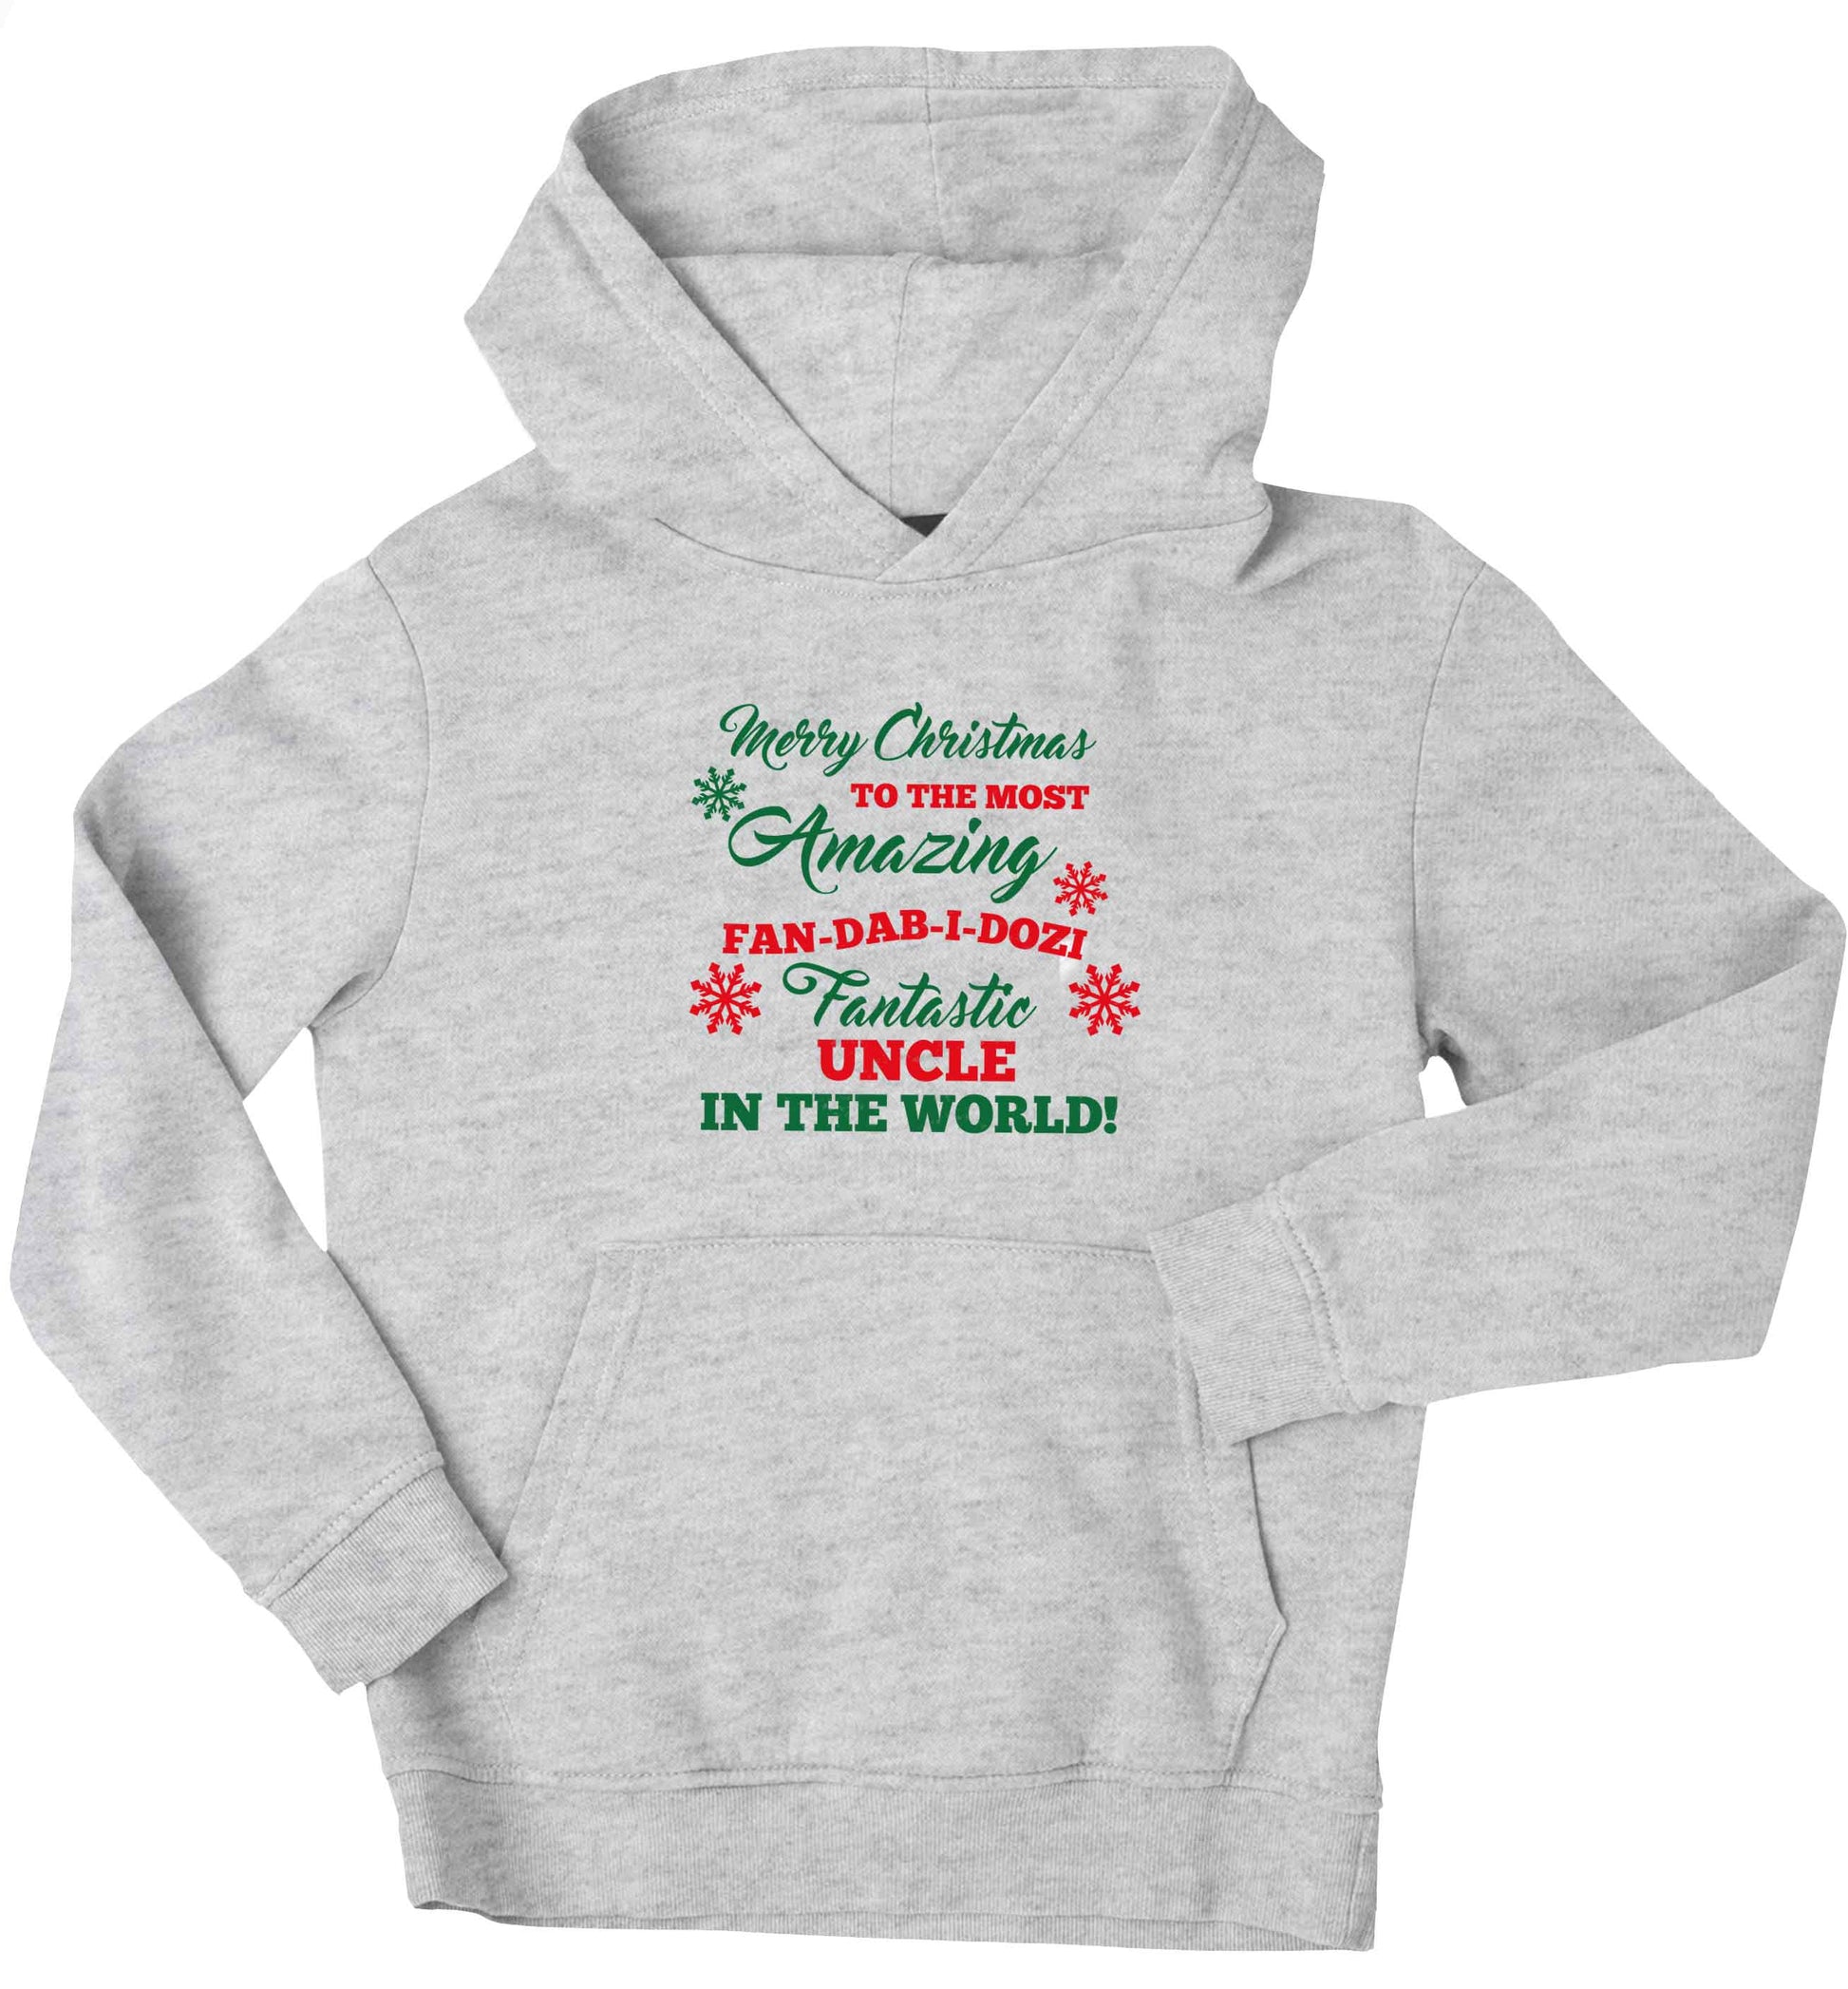 Merry Christmas to the most amazing fan-dab-i-dozi fantasic Uncle in the world children's grey hoodie 12-13 Years